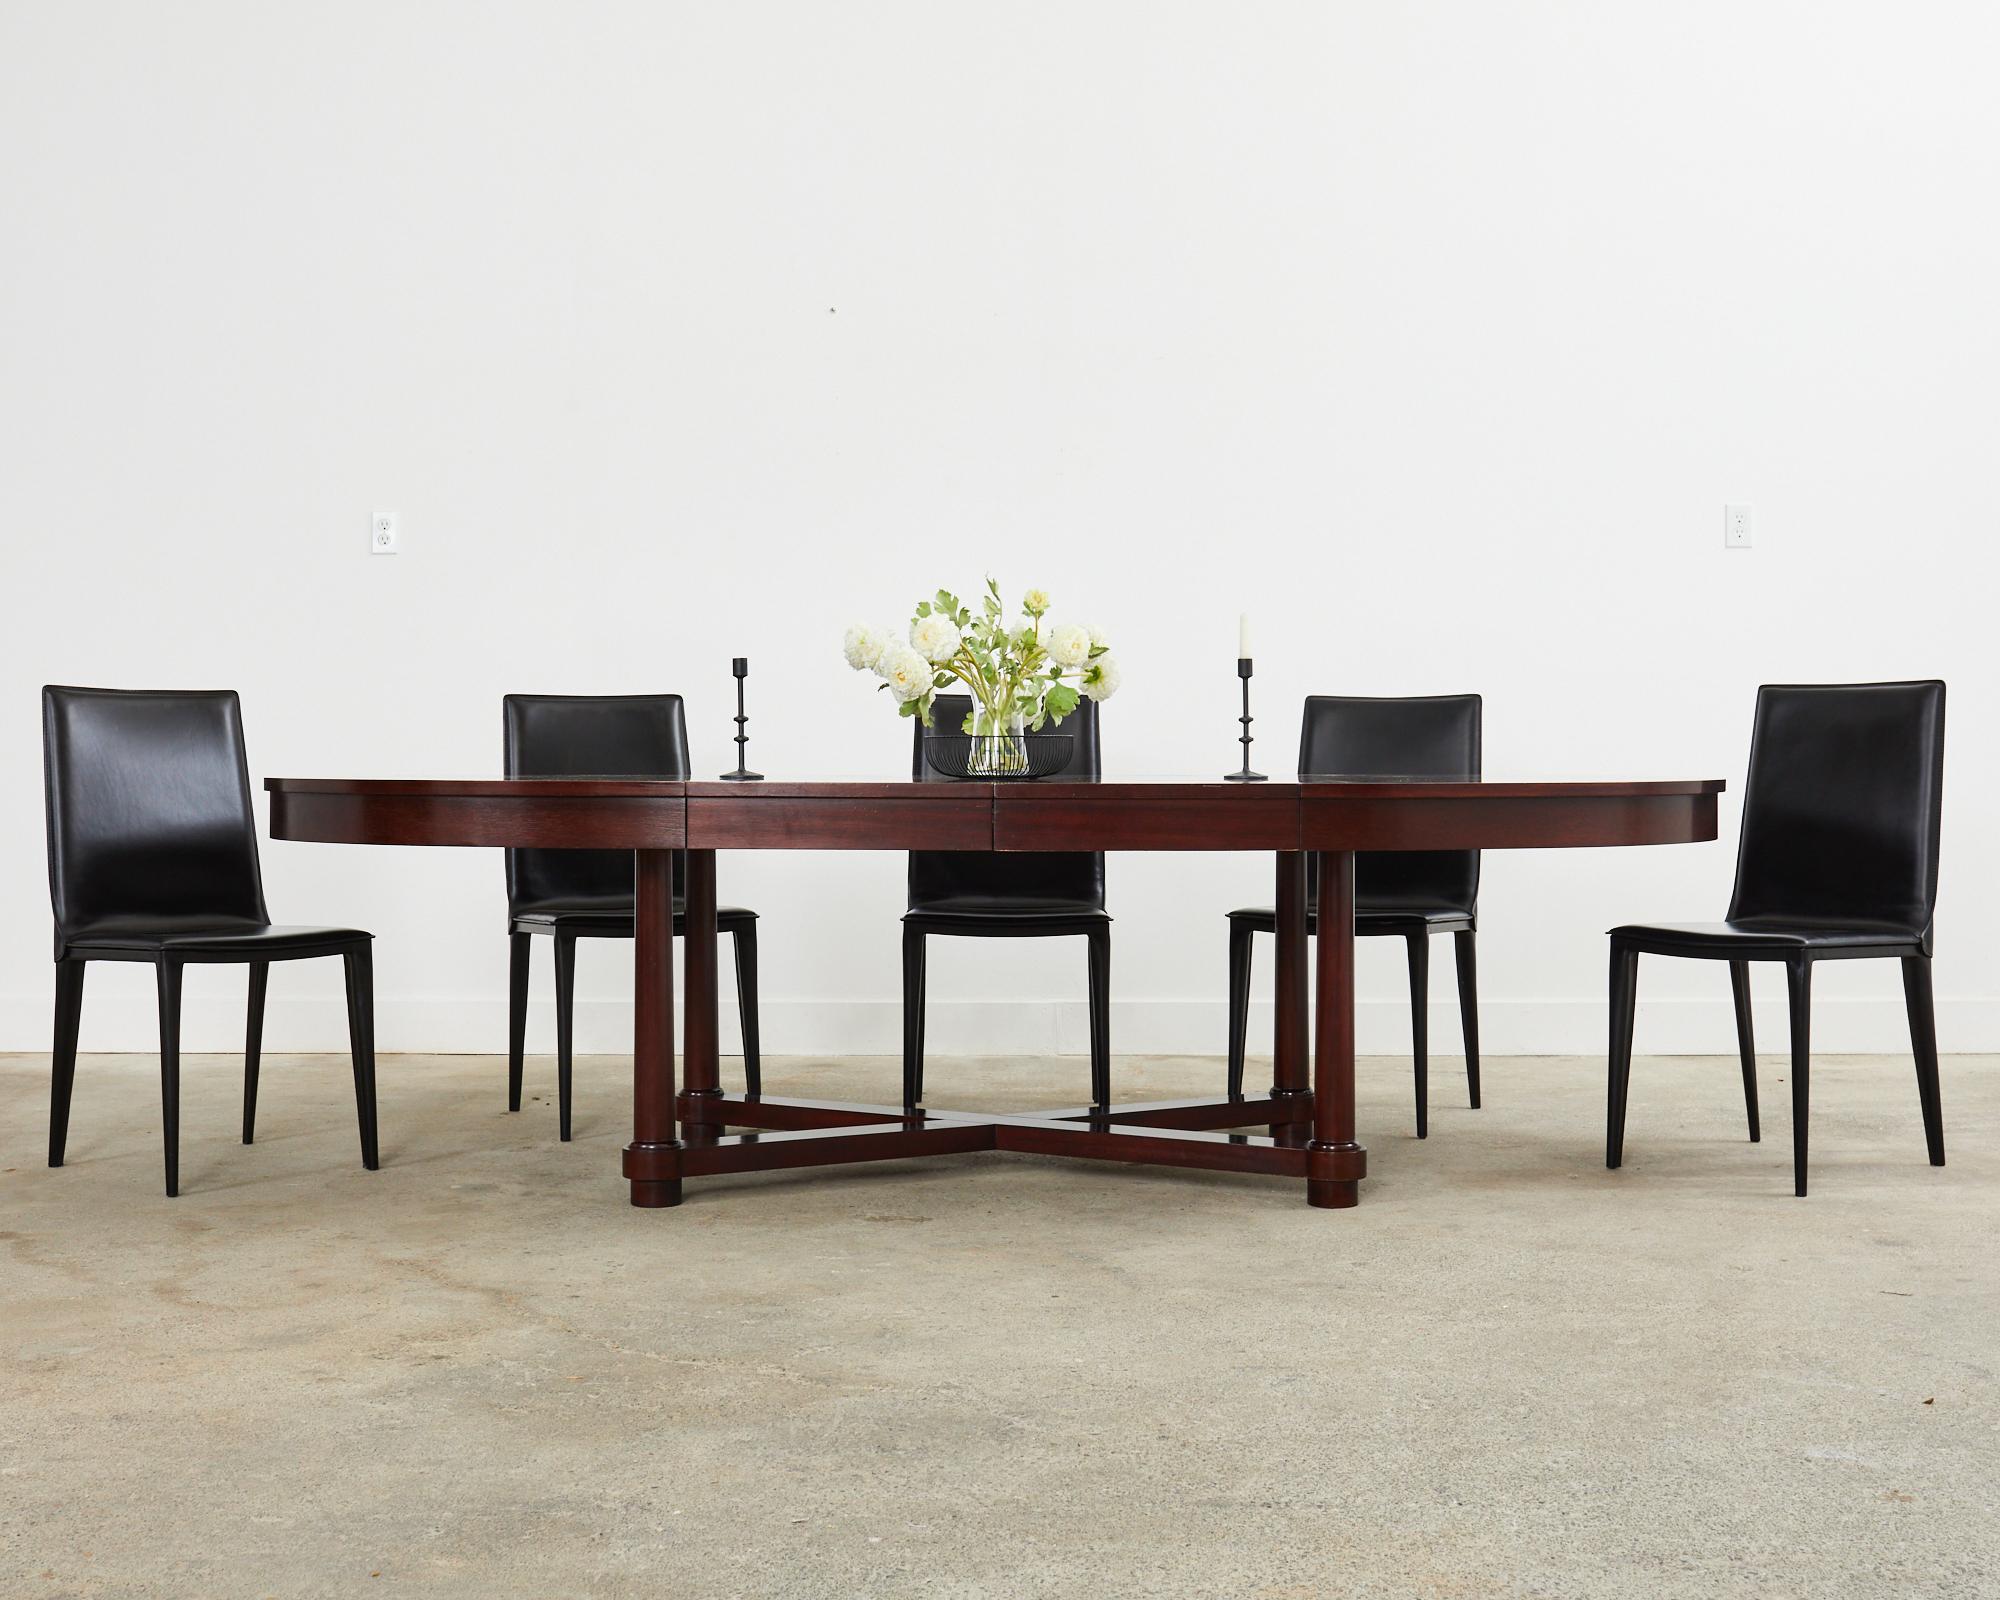 Imposing Barbara Barry collection for Baker Furniture modern neoclassical style extending dining table. Crafted from mahogany featuring an oval top that measures 68 inches wide closed and 108 inches wide with two 20 inch leaves installed. Supported